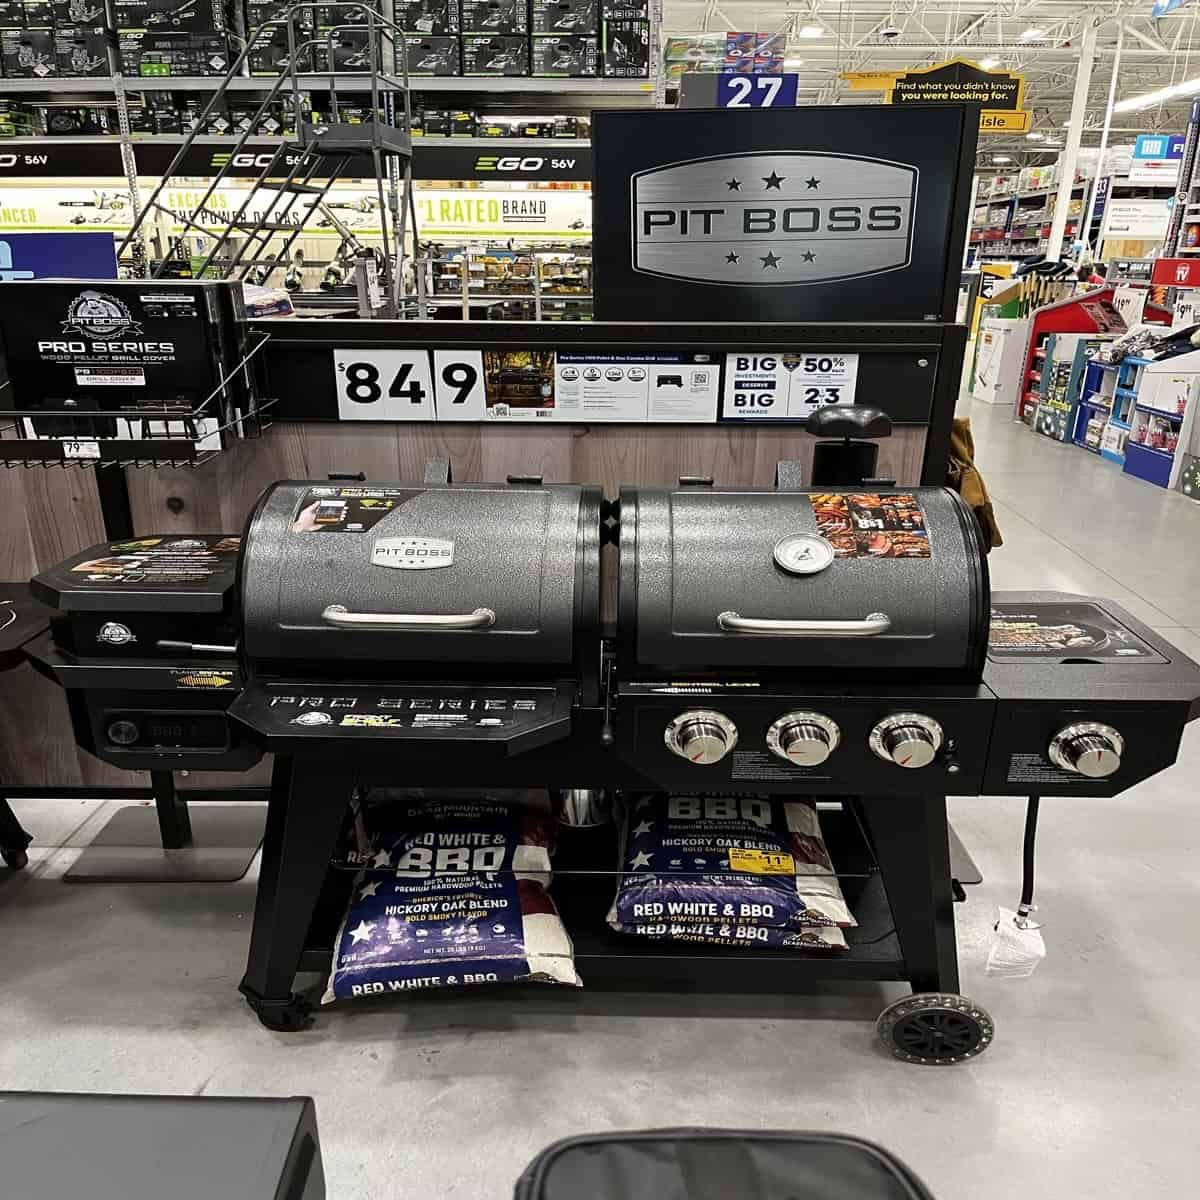 10 Things to Know Before Buying a Pit Boss Smoker - Drizzle Me Skinny!